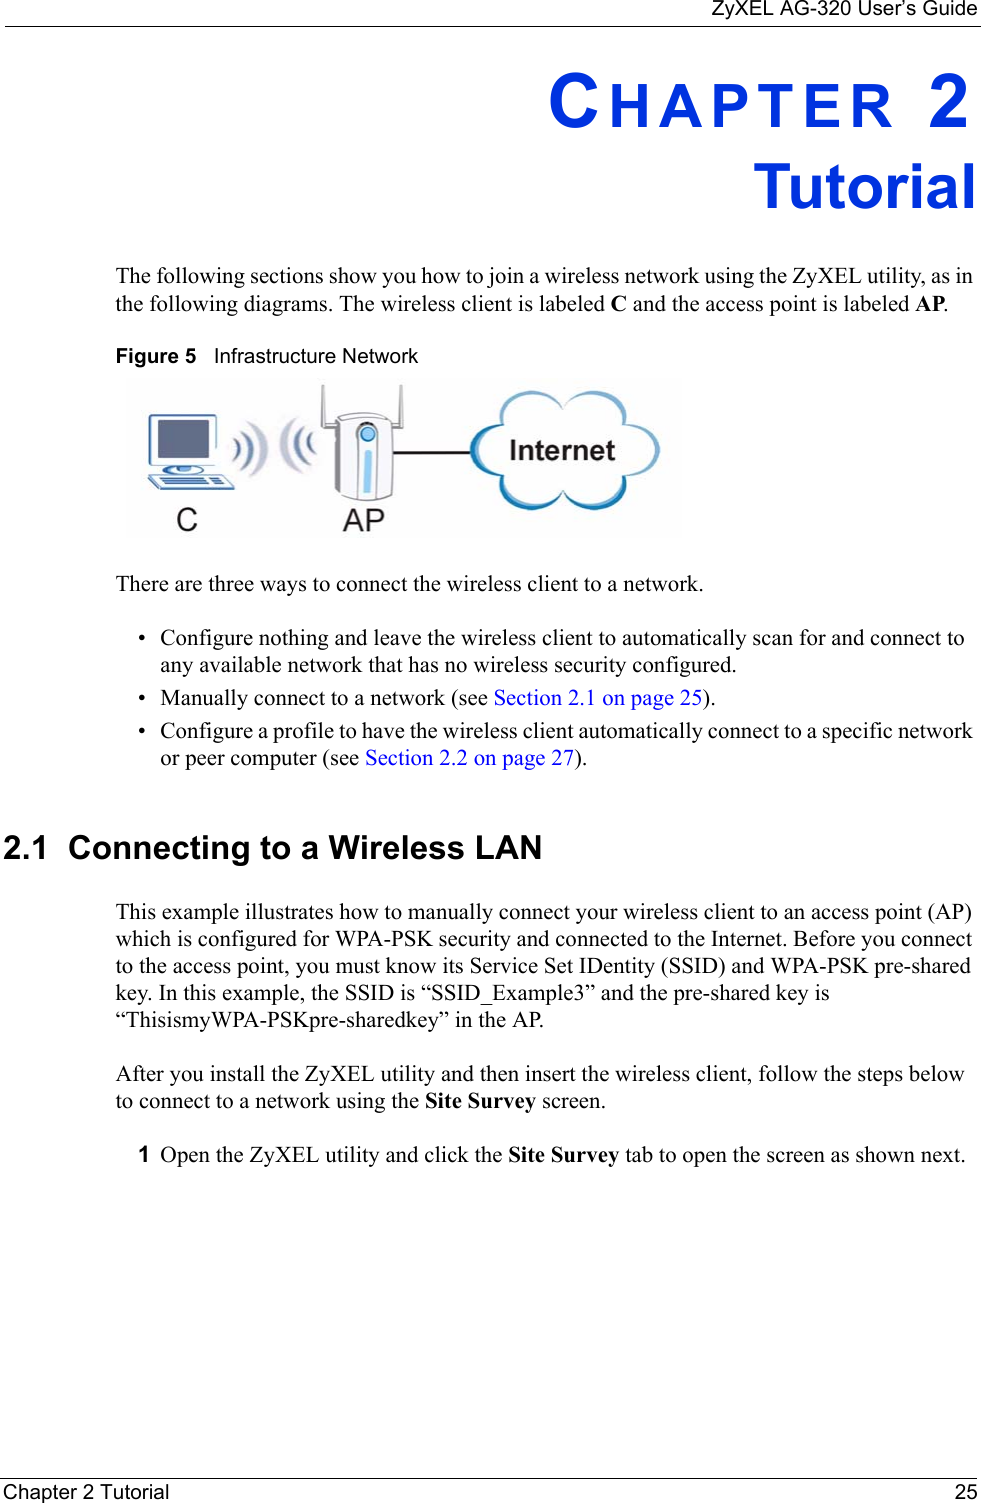 ZyXEL AG-320 User’s GuideChapter 2 Tutorial 25CHAPTER 2TutorialThe following sections show you how to join a wireless network using the ZyXEL utility, as in the following diagrams. The wireless client is labeled C and the access point is labeled AP. Figure 5   Infrastructure NetworkThere are three ways to connect the wireless client to a network.• Configure nothing and leave the wireless client to automatically scan for and connect to any available network that has no wireless security configured.• Manually connect to a network (see Section 2.1 on page 25).• Configure a profile to have the wireless client automatically connect to a specific network or peer computer (see Section 2.2 on page 27). 2.1  Connecting to a Wireless LAN This example illustrates how to manually connect your wireless client to an access point (AP) which is configured for WPA-PSK security and connected to the Internet. Before you connect to the access point, you must know its Service Set IDentity (SSID) and WPA-PSK pre-shared key. In this example, the SSID is “SSID_Example3” and the pre-shared key is “ThisismyWPA-PSKpre-sharedkey” in the AP. After you install the ZyXEL utility and then insert the wireless client, follow the steps below to connect to a network using the Site Survey screen. 1Open the ZyXEL utility and click the Site Survey tab to open the screen as shown next.